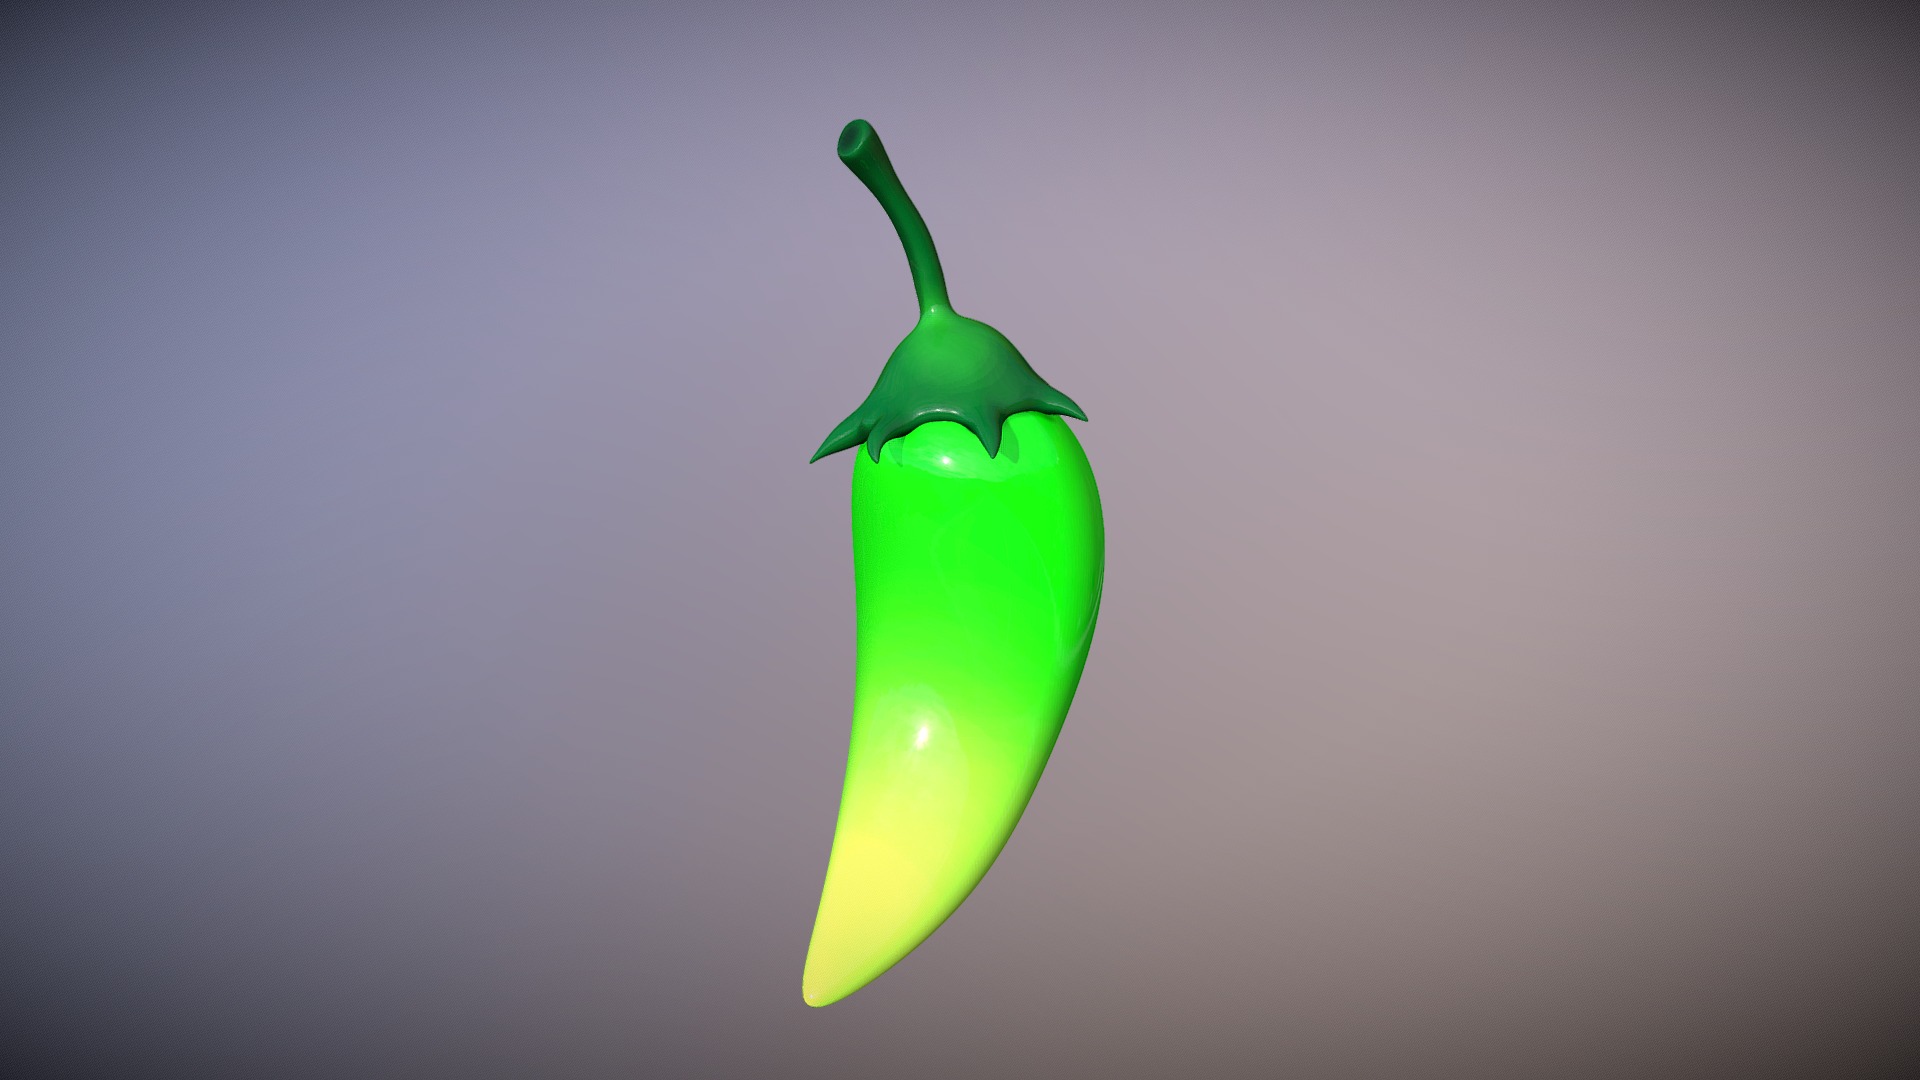 3D model Chile (Green) - This is a 3D model of the Chile (Green). The 3D model is about a green and white object.